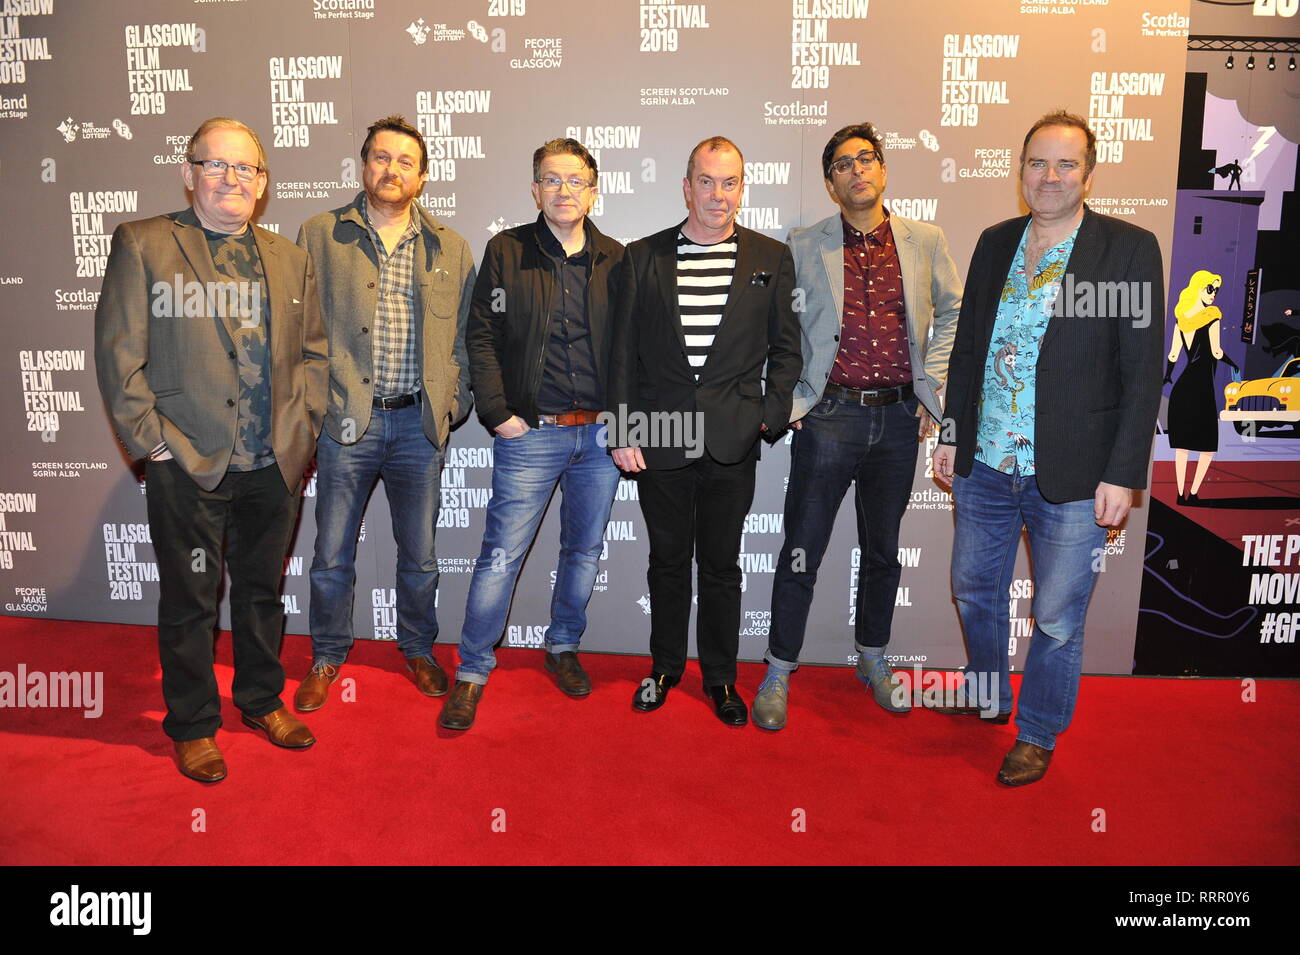 Glasgow, UK. 26th Feb, 2019. (Left-Right) Ford Kiernan - Actor/Writer; Michael Hines - Director; Mark Cox - Actor; Gavin Mitchell - Actor; Sanjeev Kohli - Actor; Greg Hemphill - Actor/Writer seen on the red carpet from TV hit show, Still Game, seen on the red carpet at the Glasgow Film Theatre. Credit: Colin Fisher/Alamy Live News Stock Photo